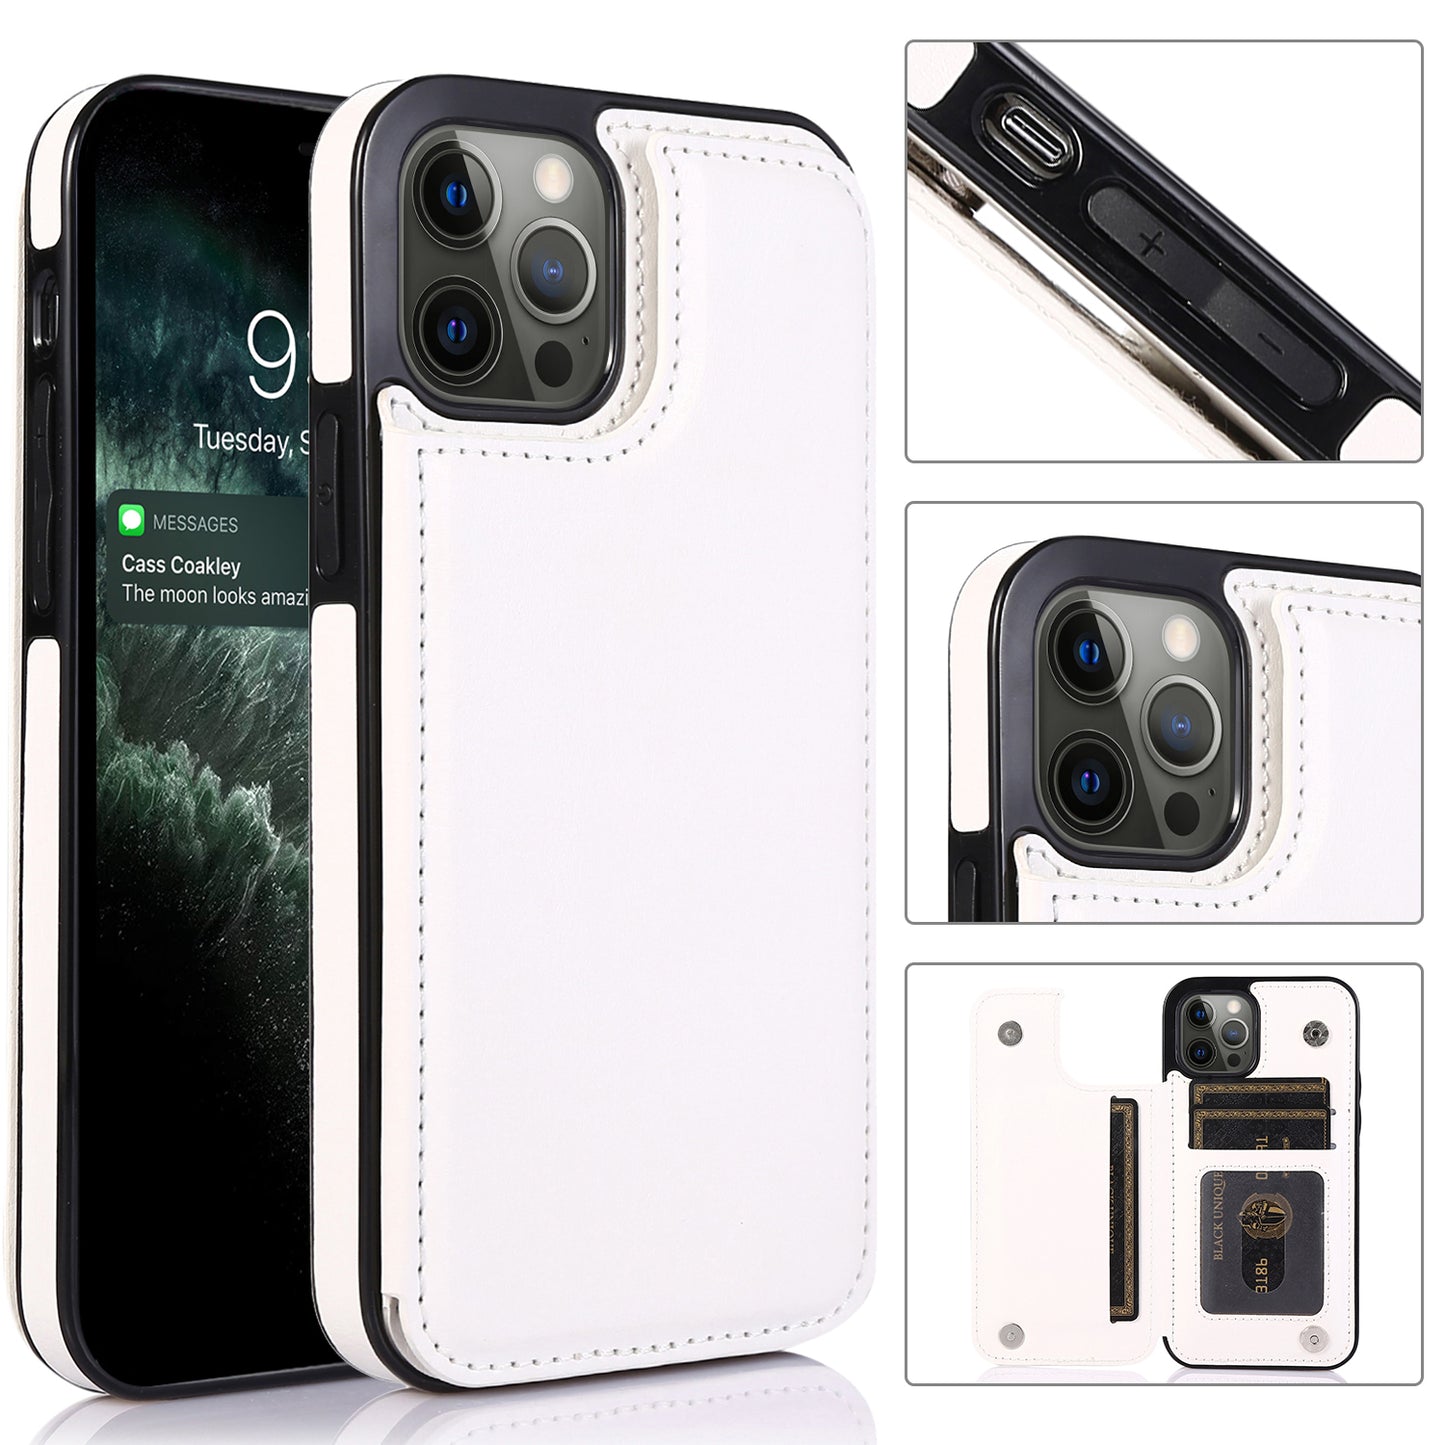 Apple iPhone 12 Pro Max Leather Cover Double Buckles Shock Resistant Multiple Card Slots Magnetic Fold Pocket